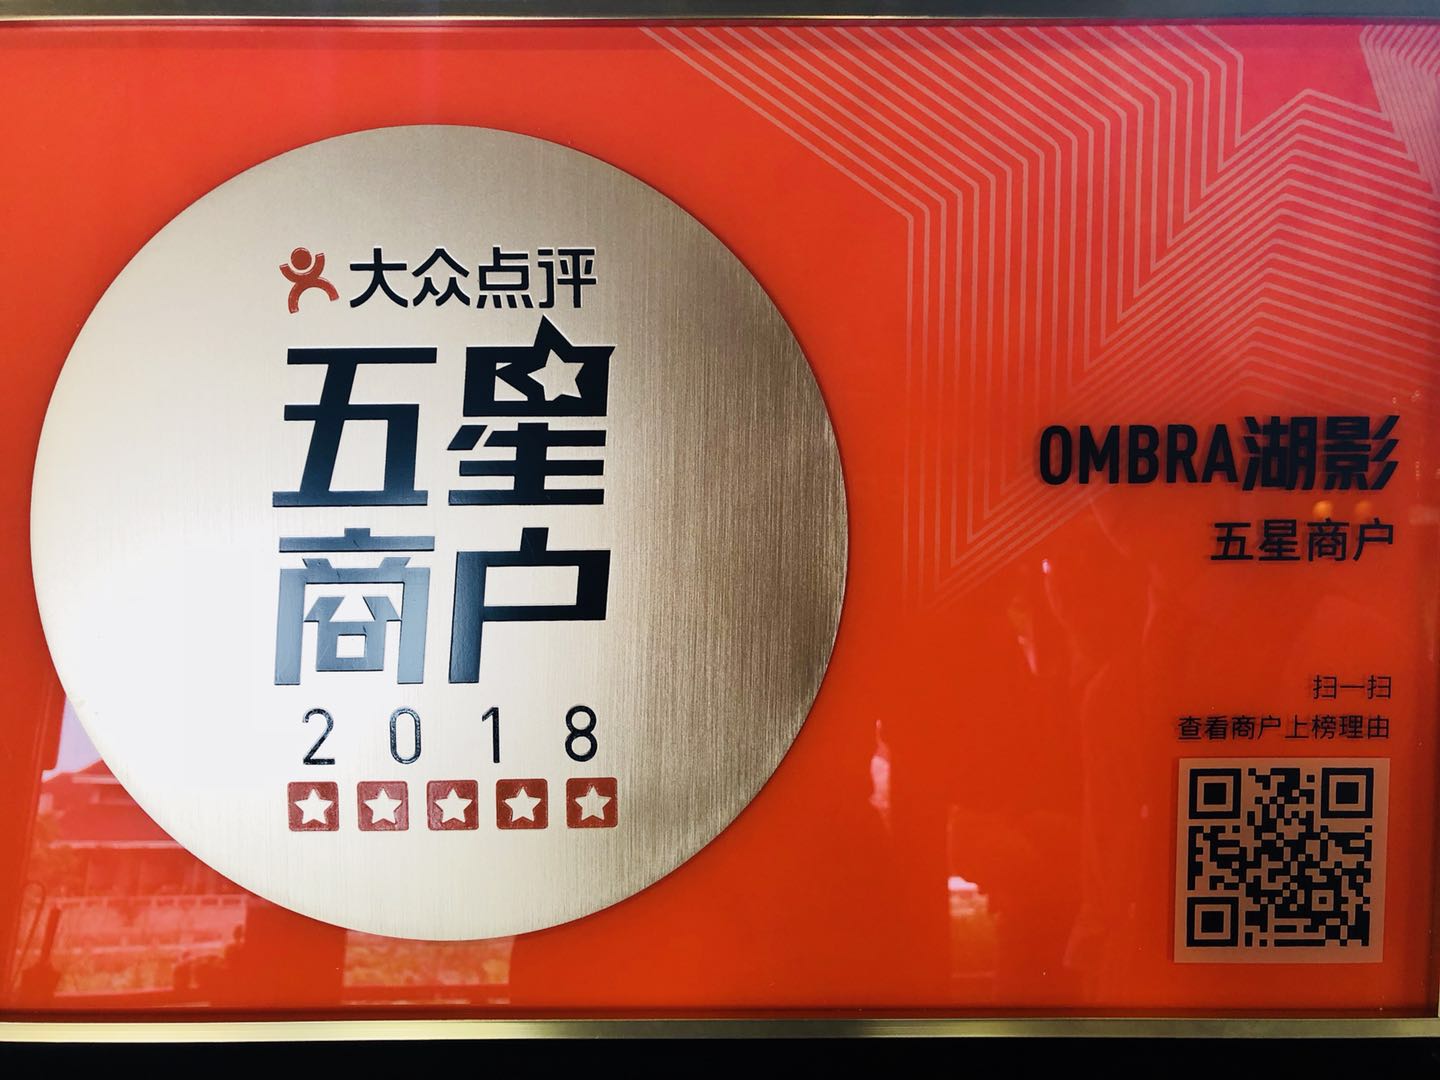 Congratulations to OMBRA for winning the five star merchant award